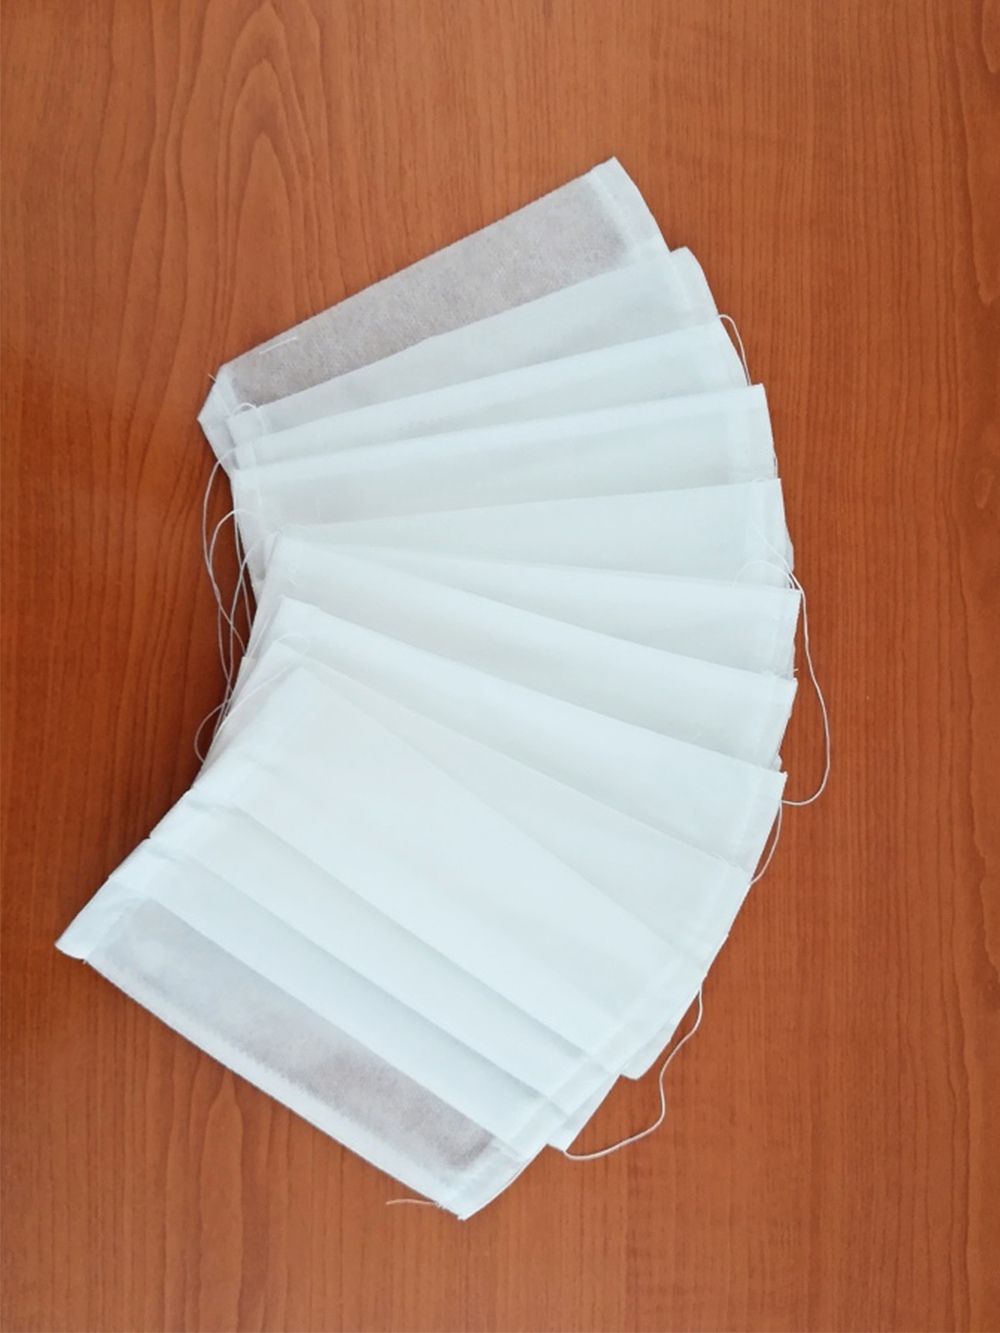 Mask from nonwoven clot